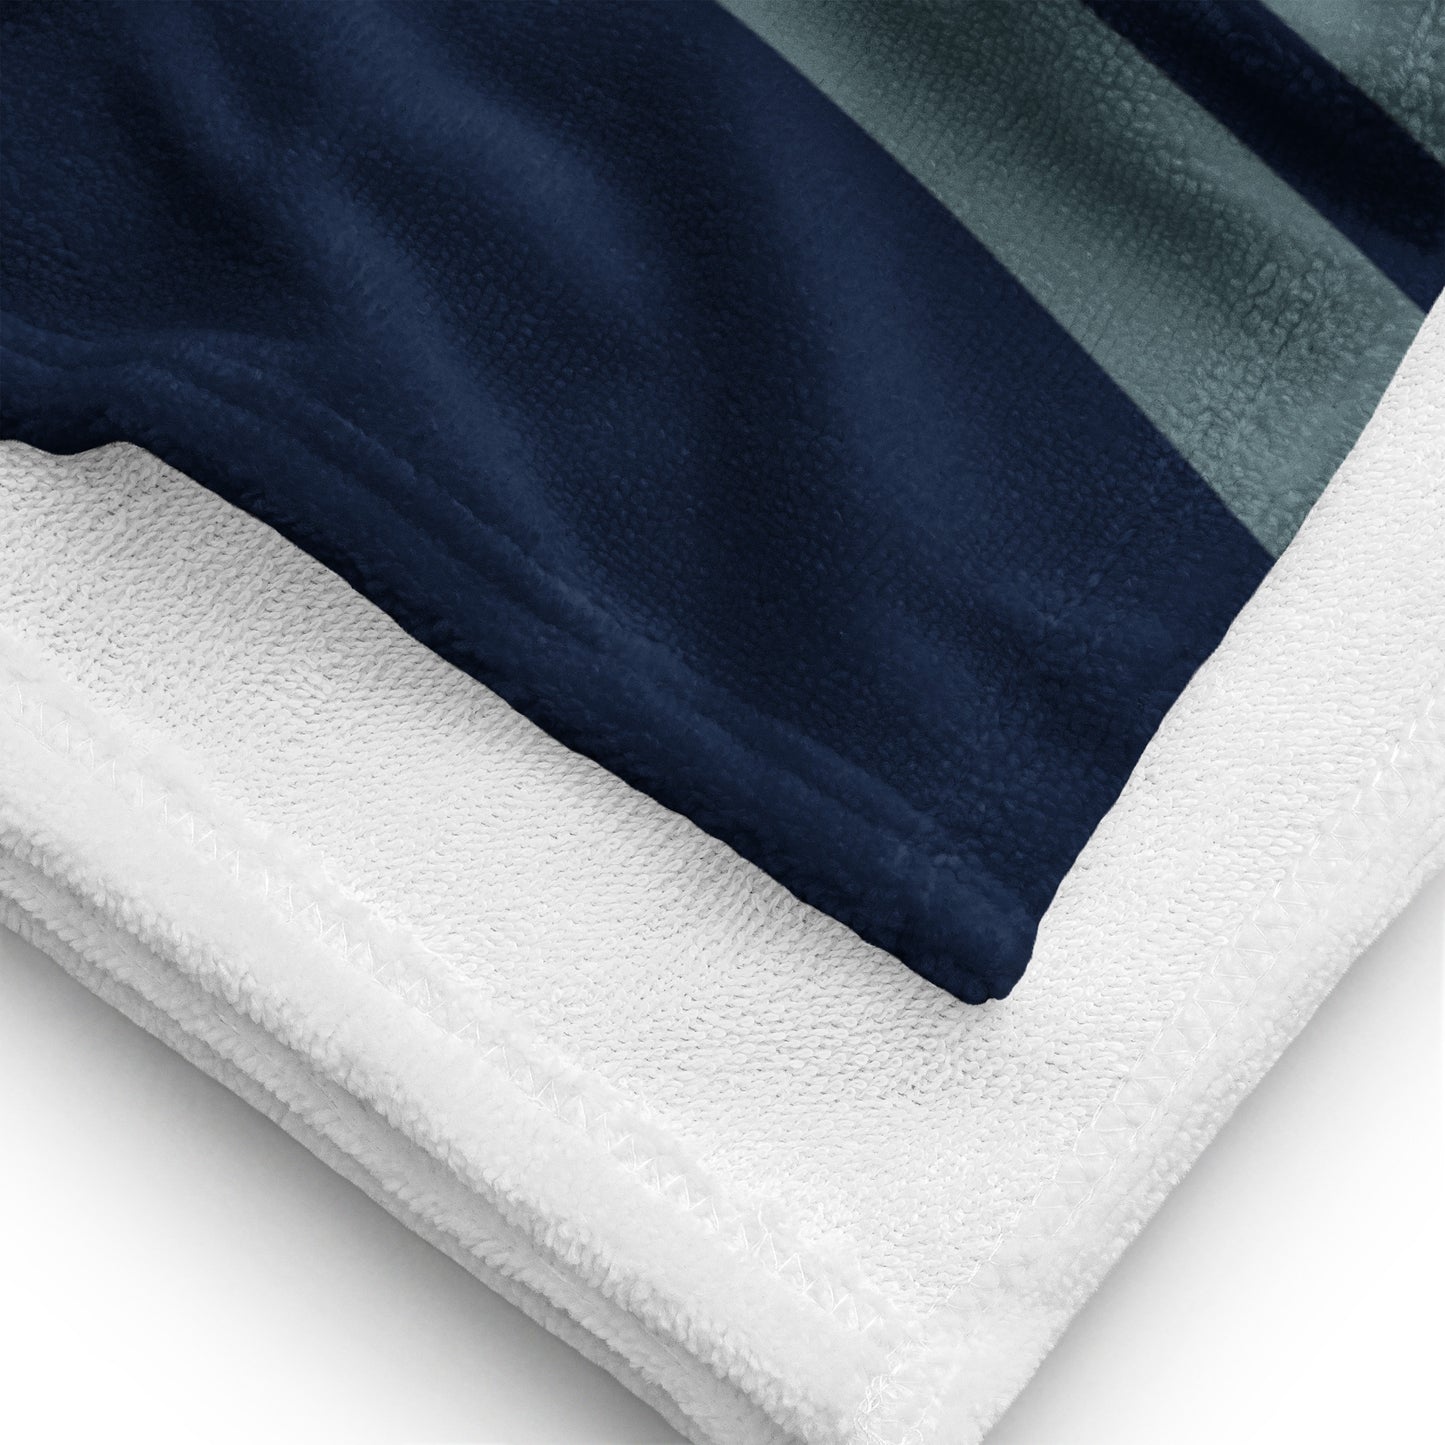 TIME OF VIBES - Towel BEACH (Navy/Blue) - €39.00